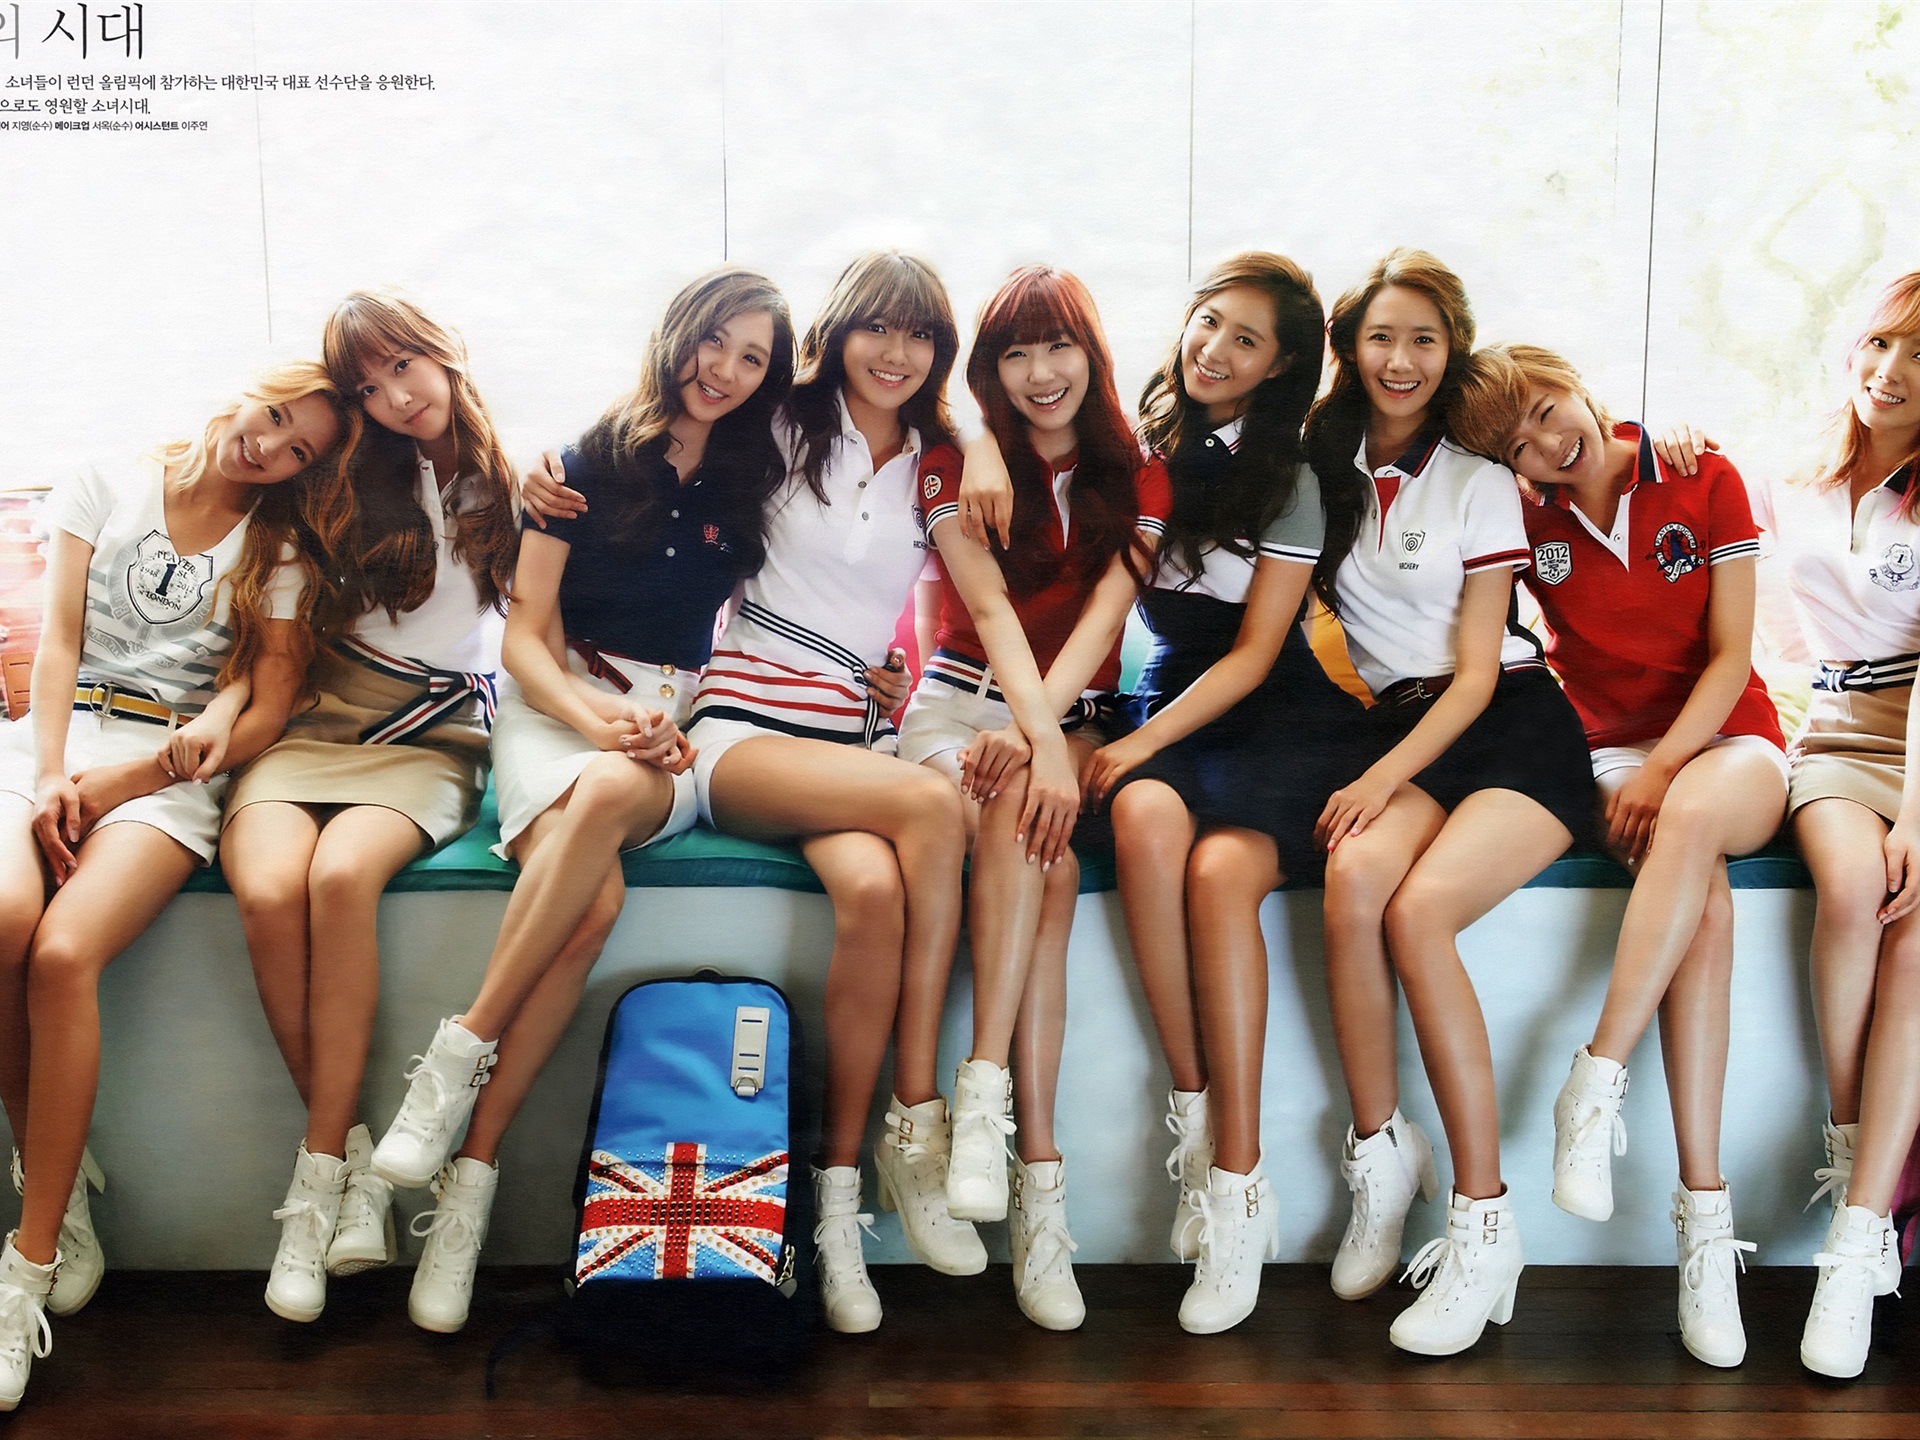 Girls Generation latest HD wallpapers collection #1 - 1920x1440